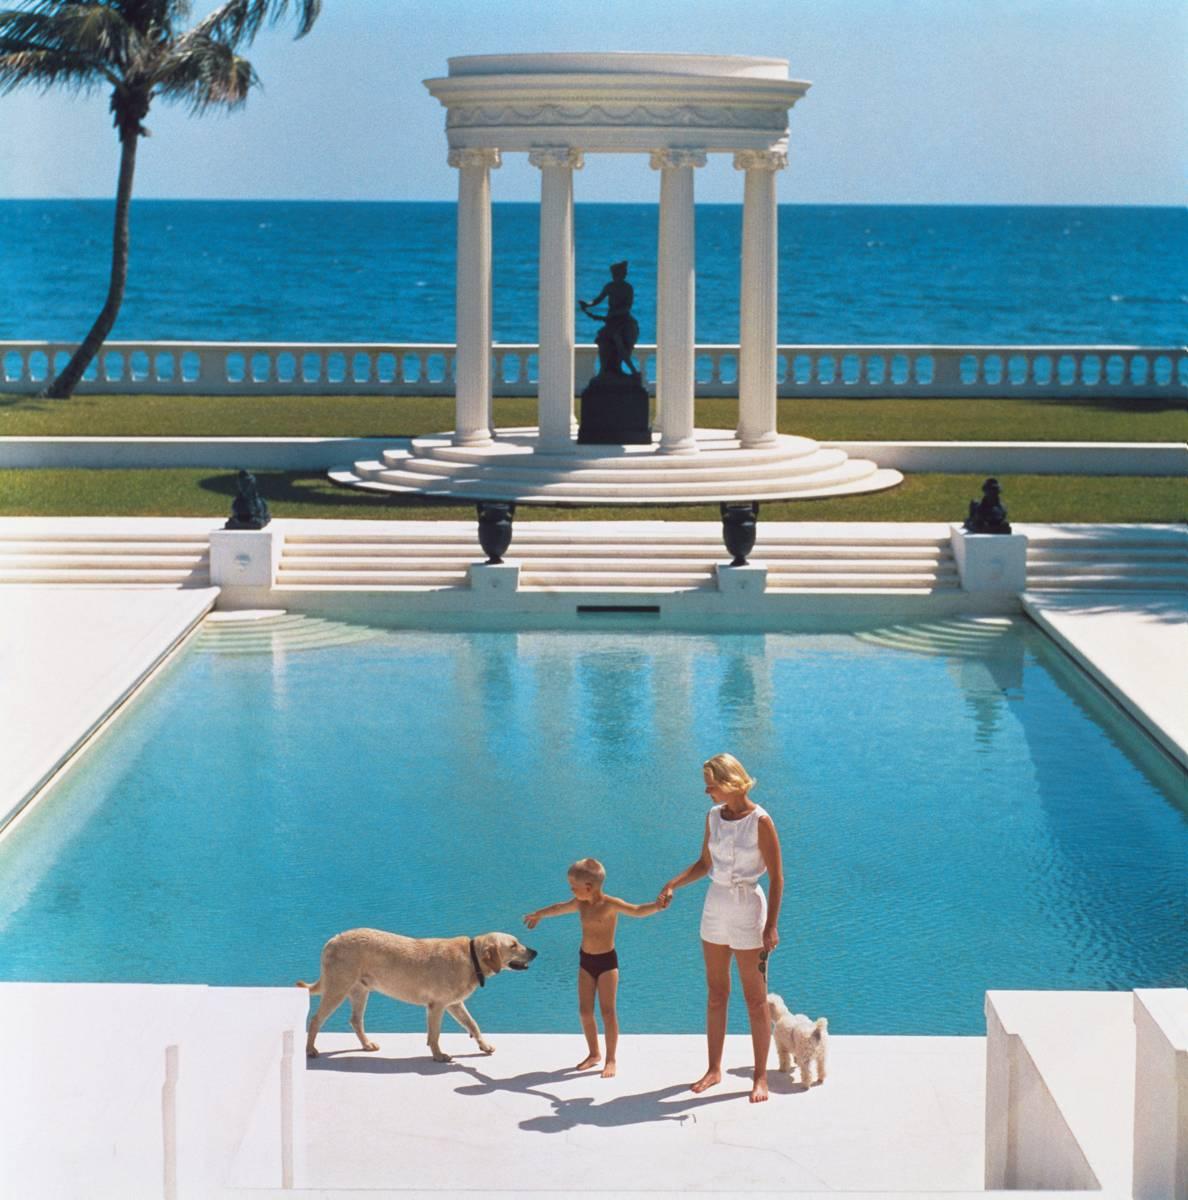 Nice Pool' Palm Beach (Slim Aarons Estate Edition)

American writer C.Z. Guest (Mrs F.C. Winston Guest, 1920 - 2003) and her son Alexander Michael Douglas Dudley Guest in front of their Grecian temple pool on the ocean-front estate, Villa Artemis,